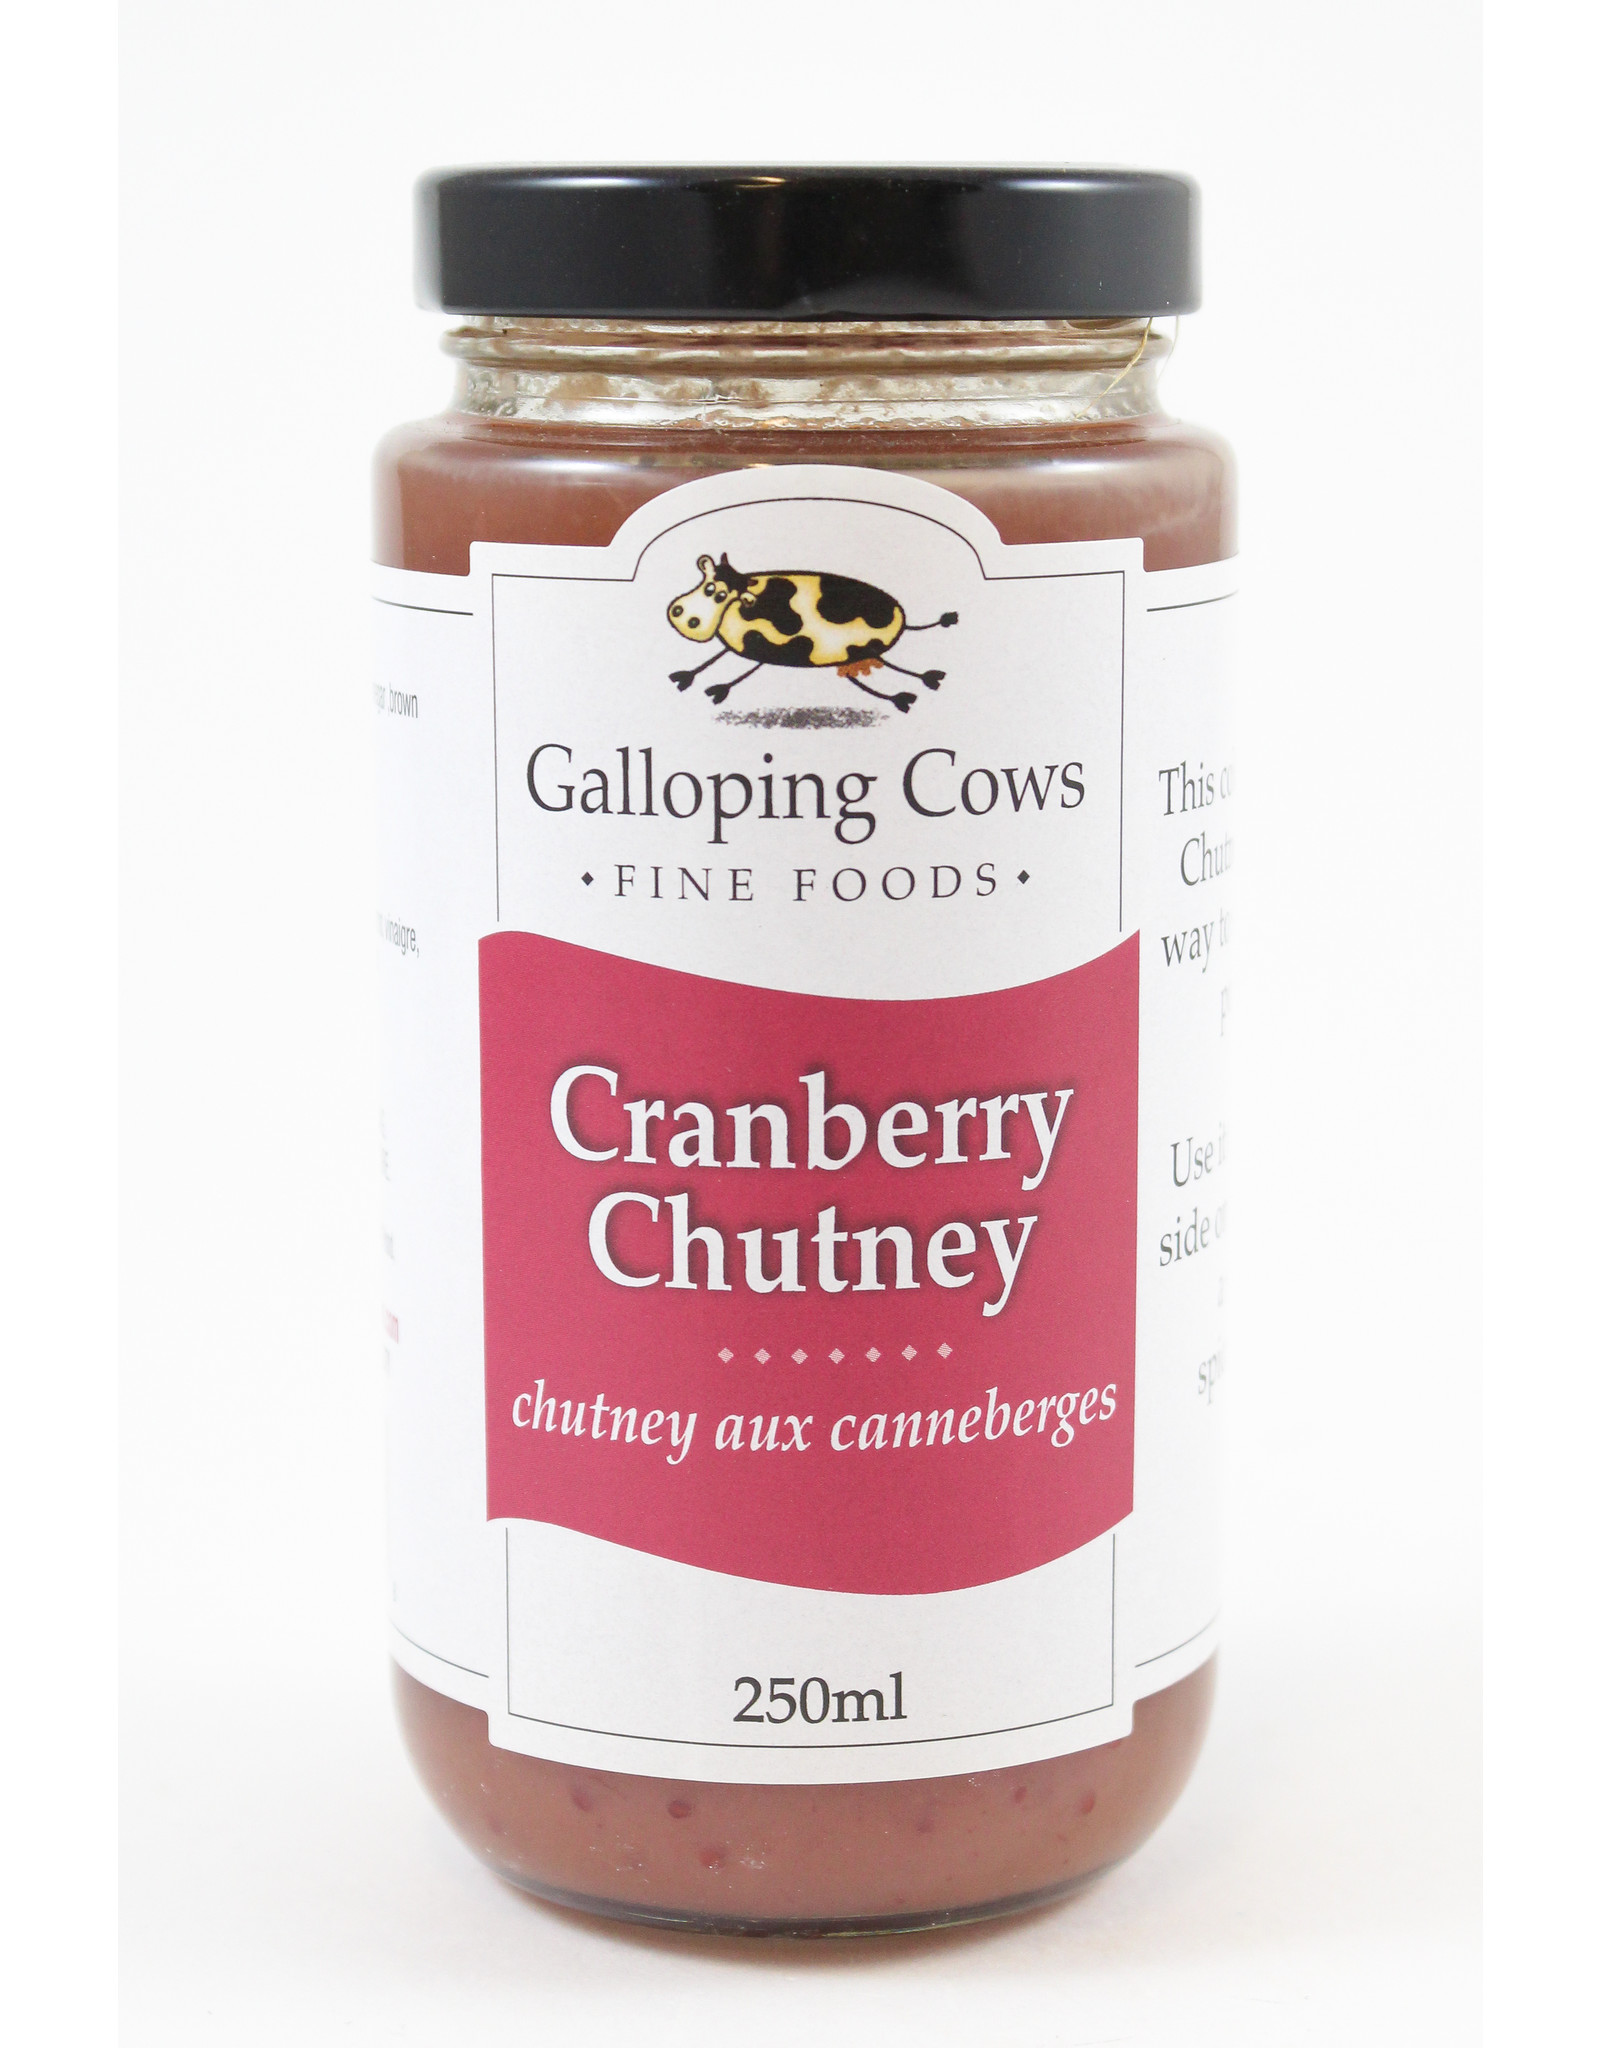 Galloping Cows Chutneys by Galloping Cows